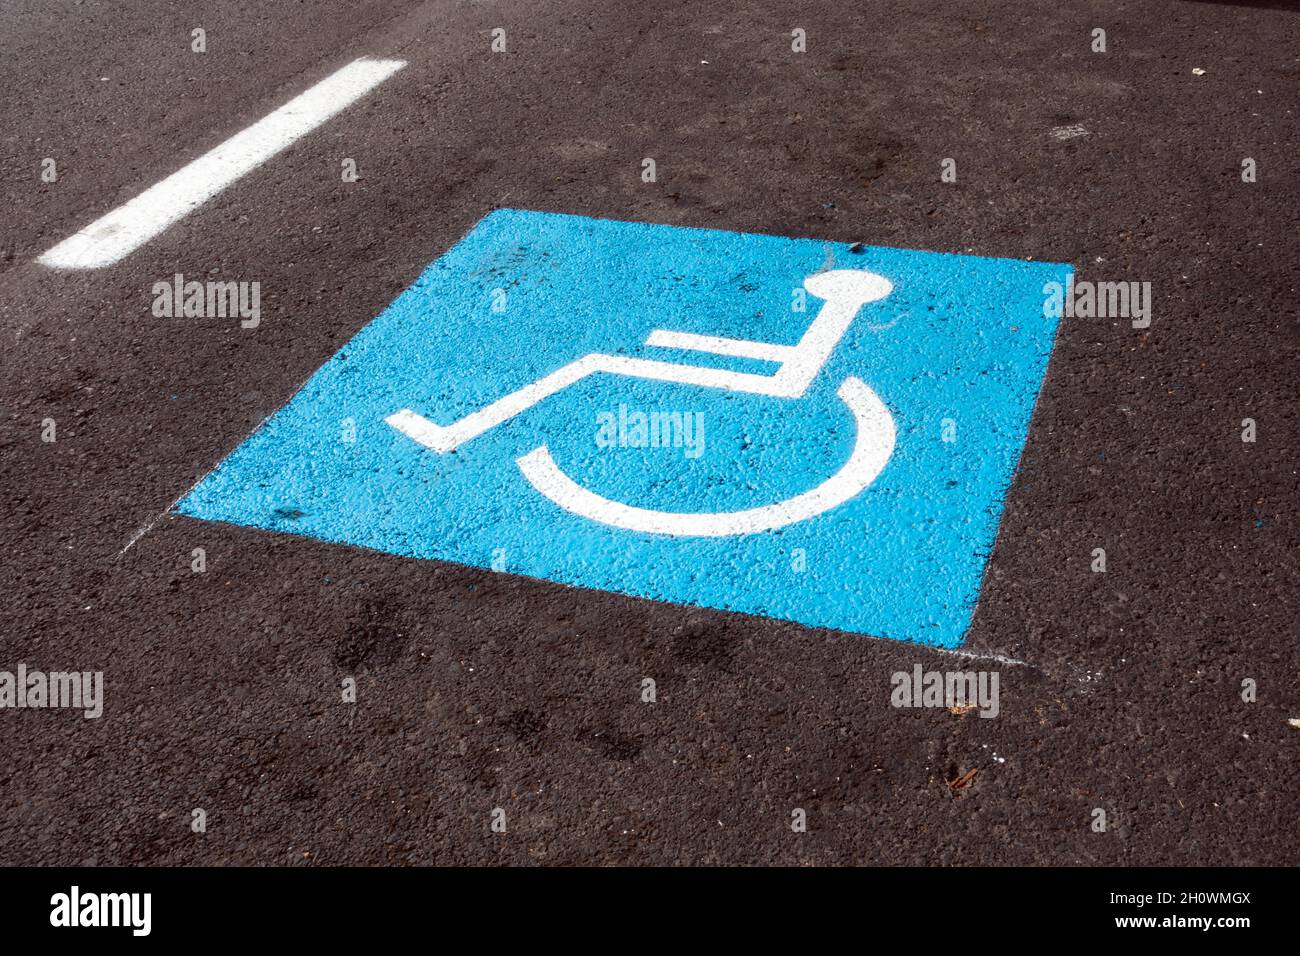 disabled parking marking on road Stock Photo